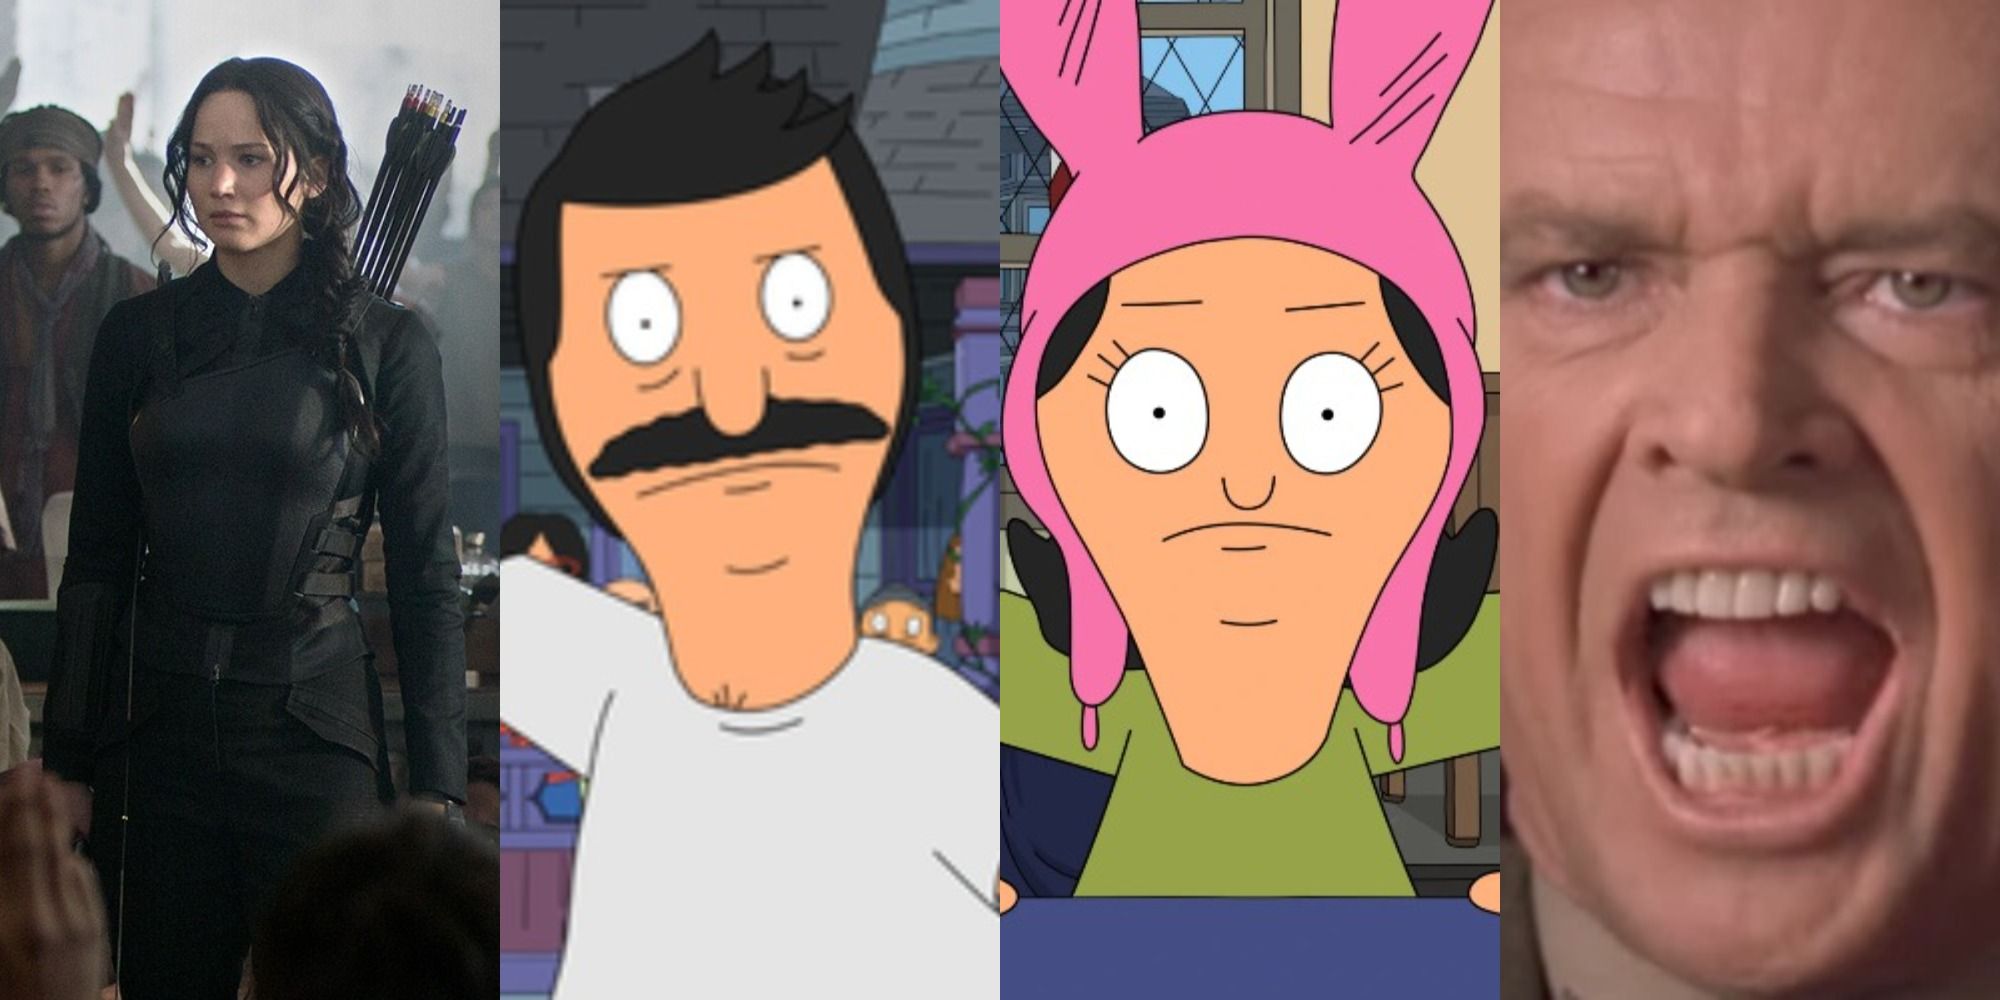 4 part image with Hunger Games, two Bob's burgers images of Bob and Lousie, and Nicholson in A Few Good Men